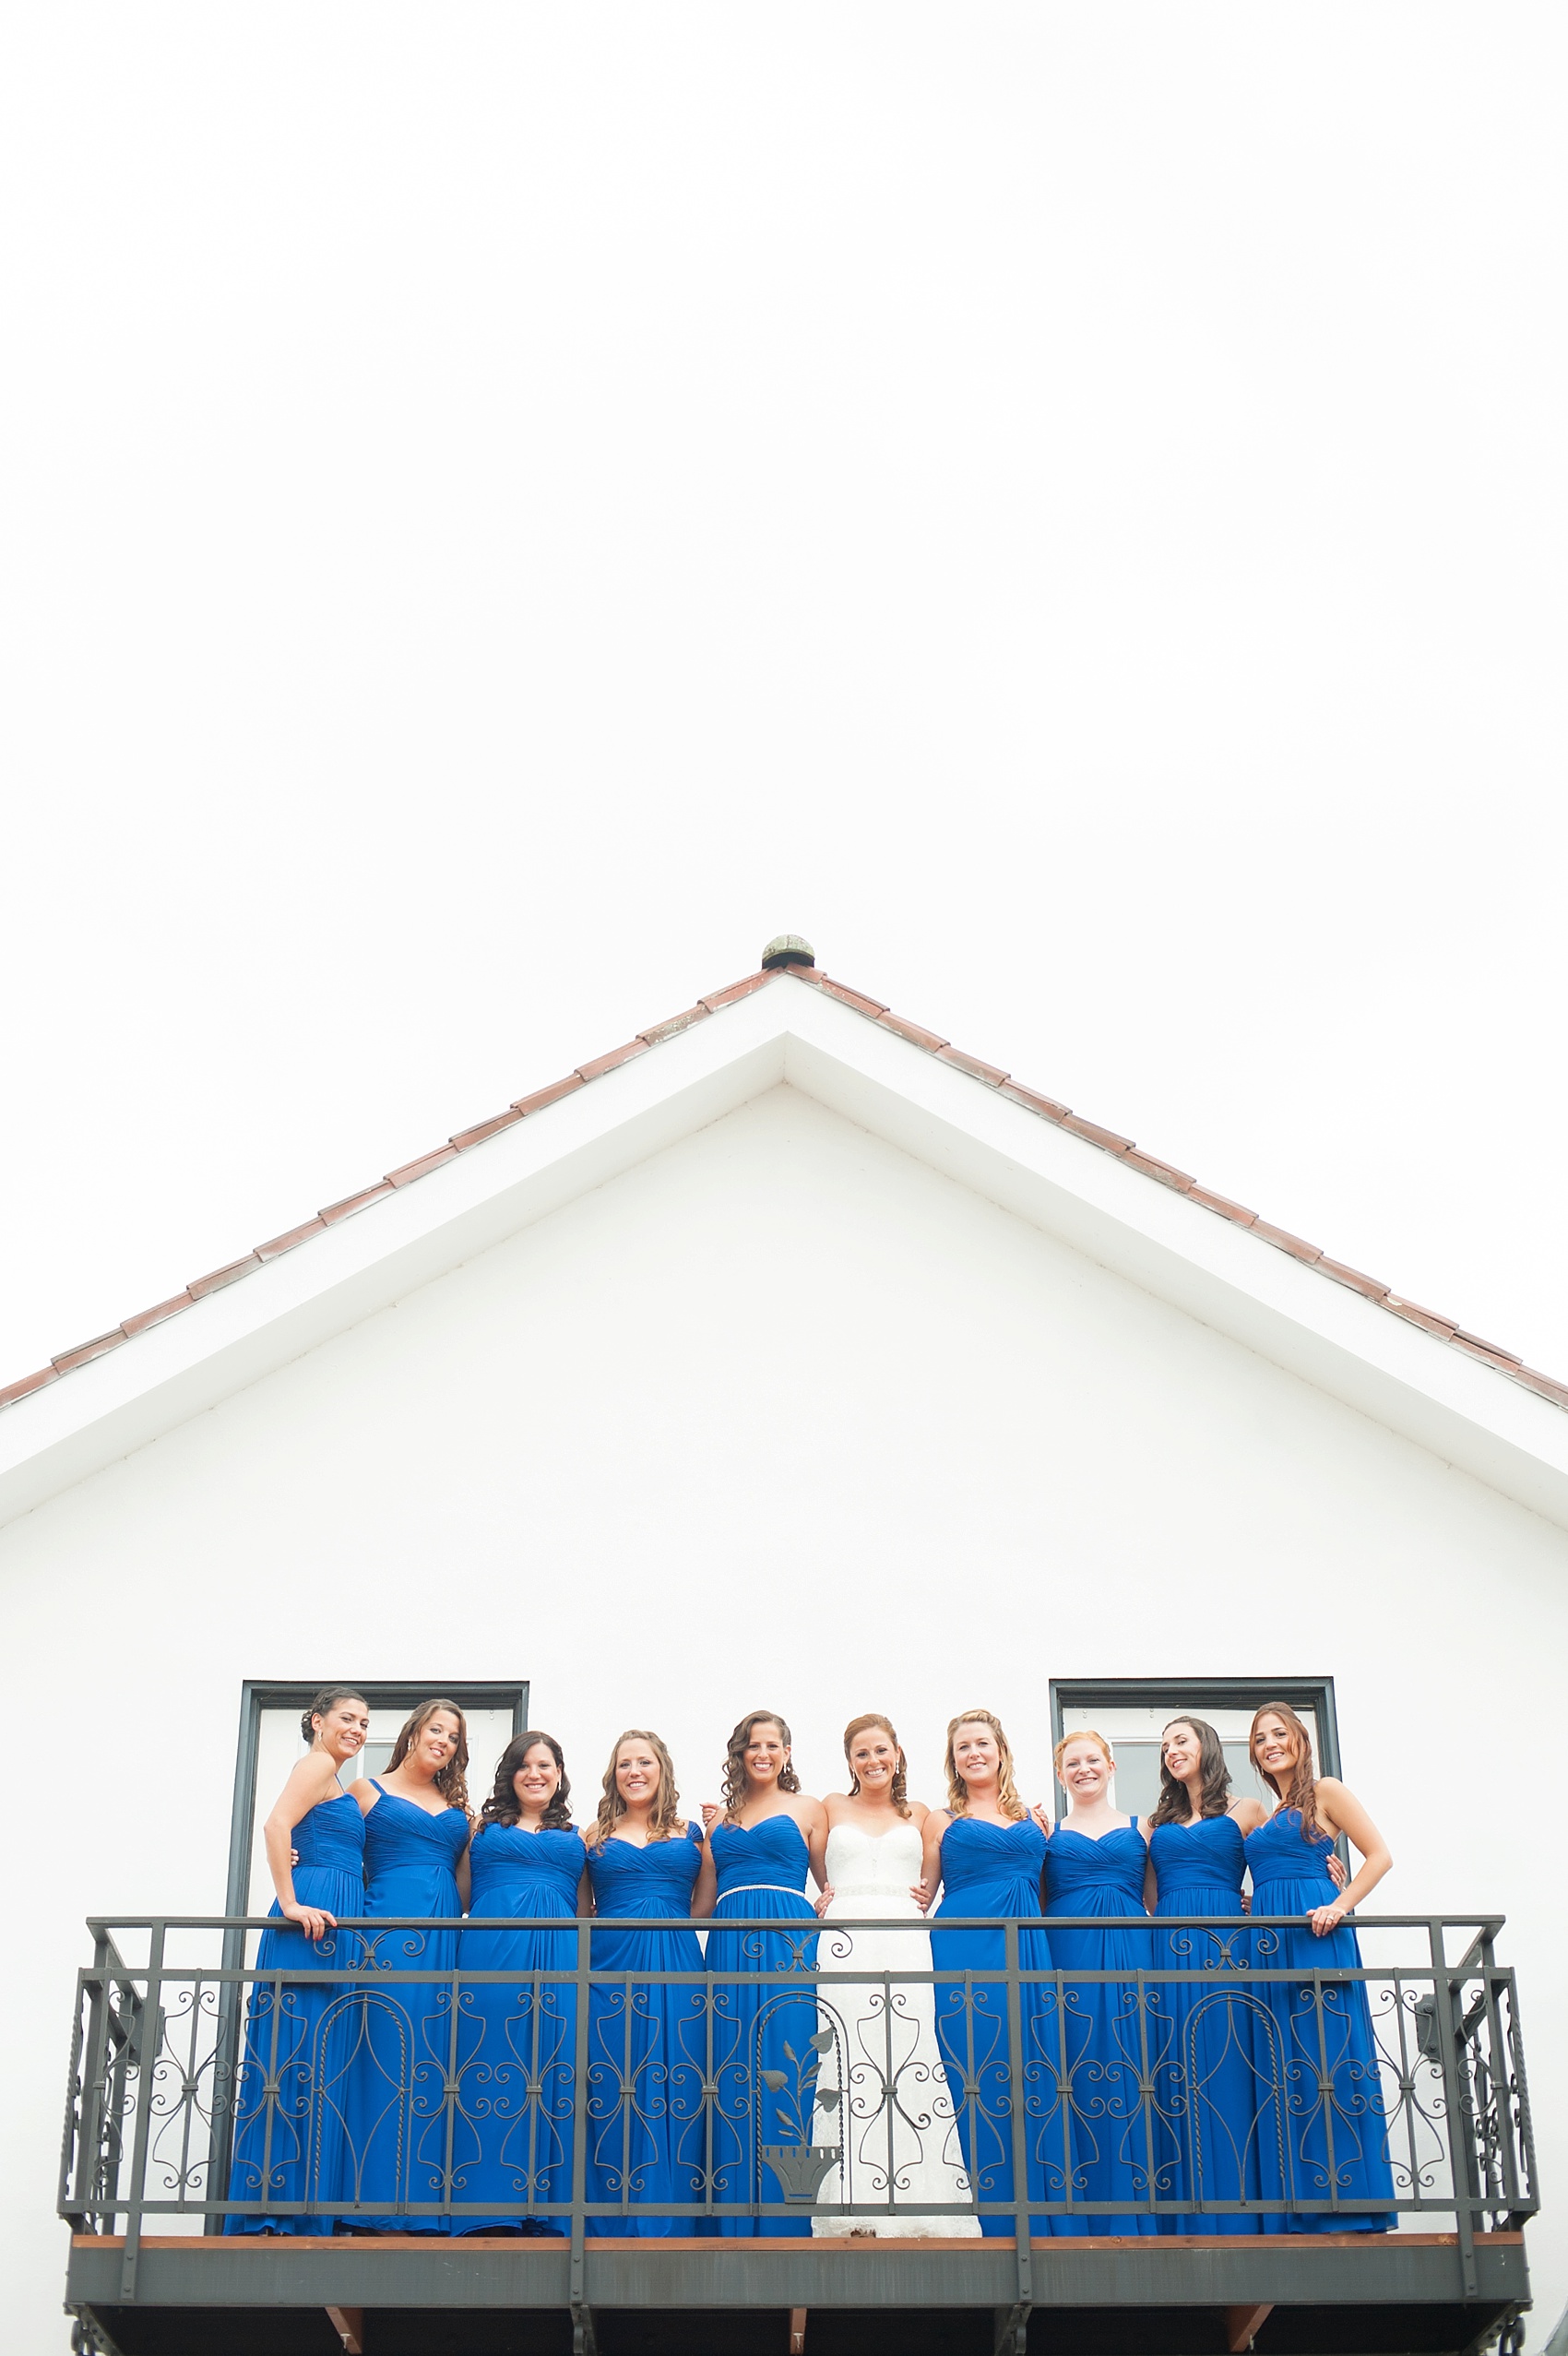 Perona Farms wedding photos of blue gown bridesmaids for a rustic colorful summer celebration. Pictures by New Jersey photographer Mikkel Paige Photography.